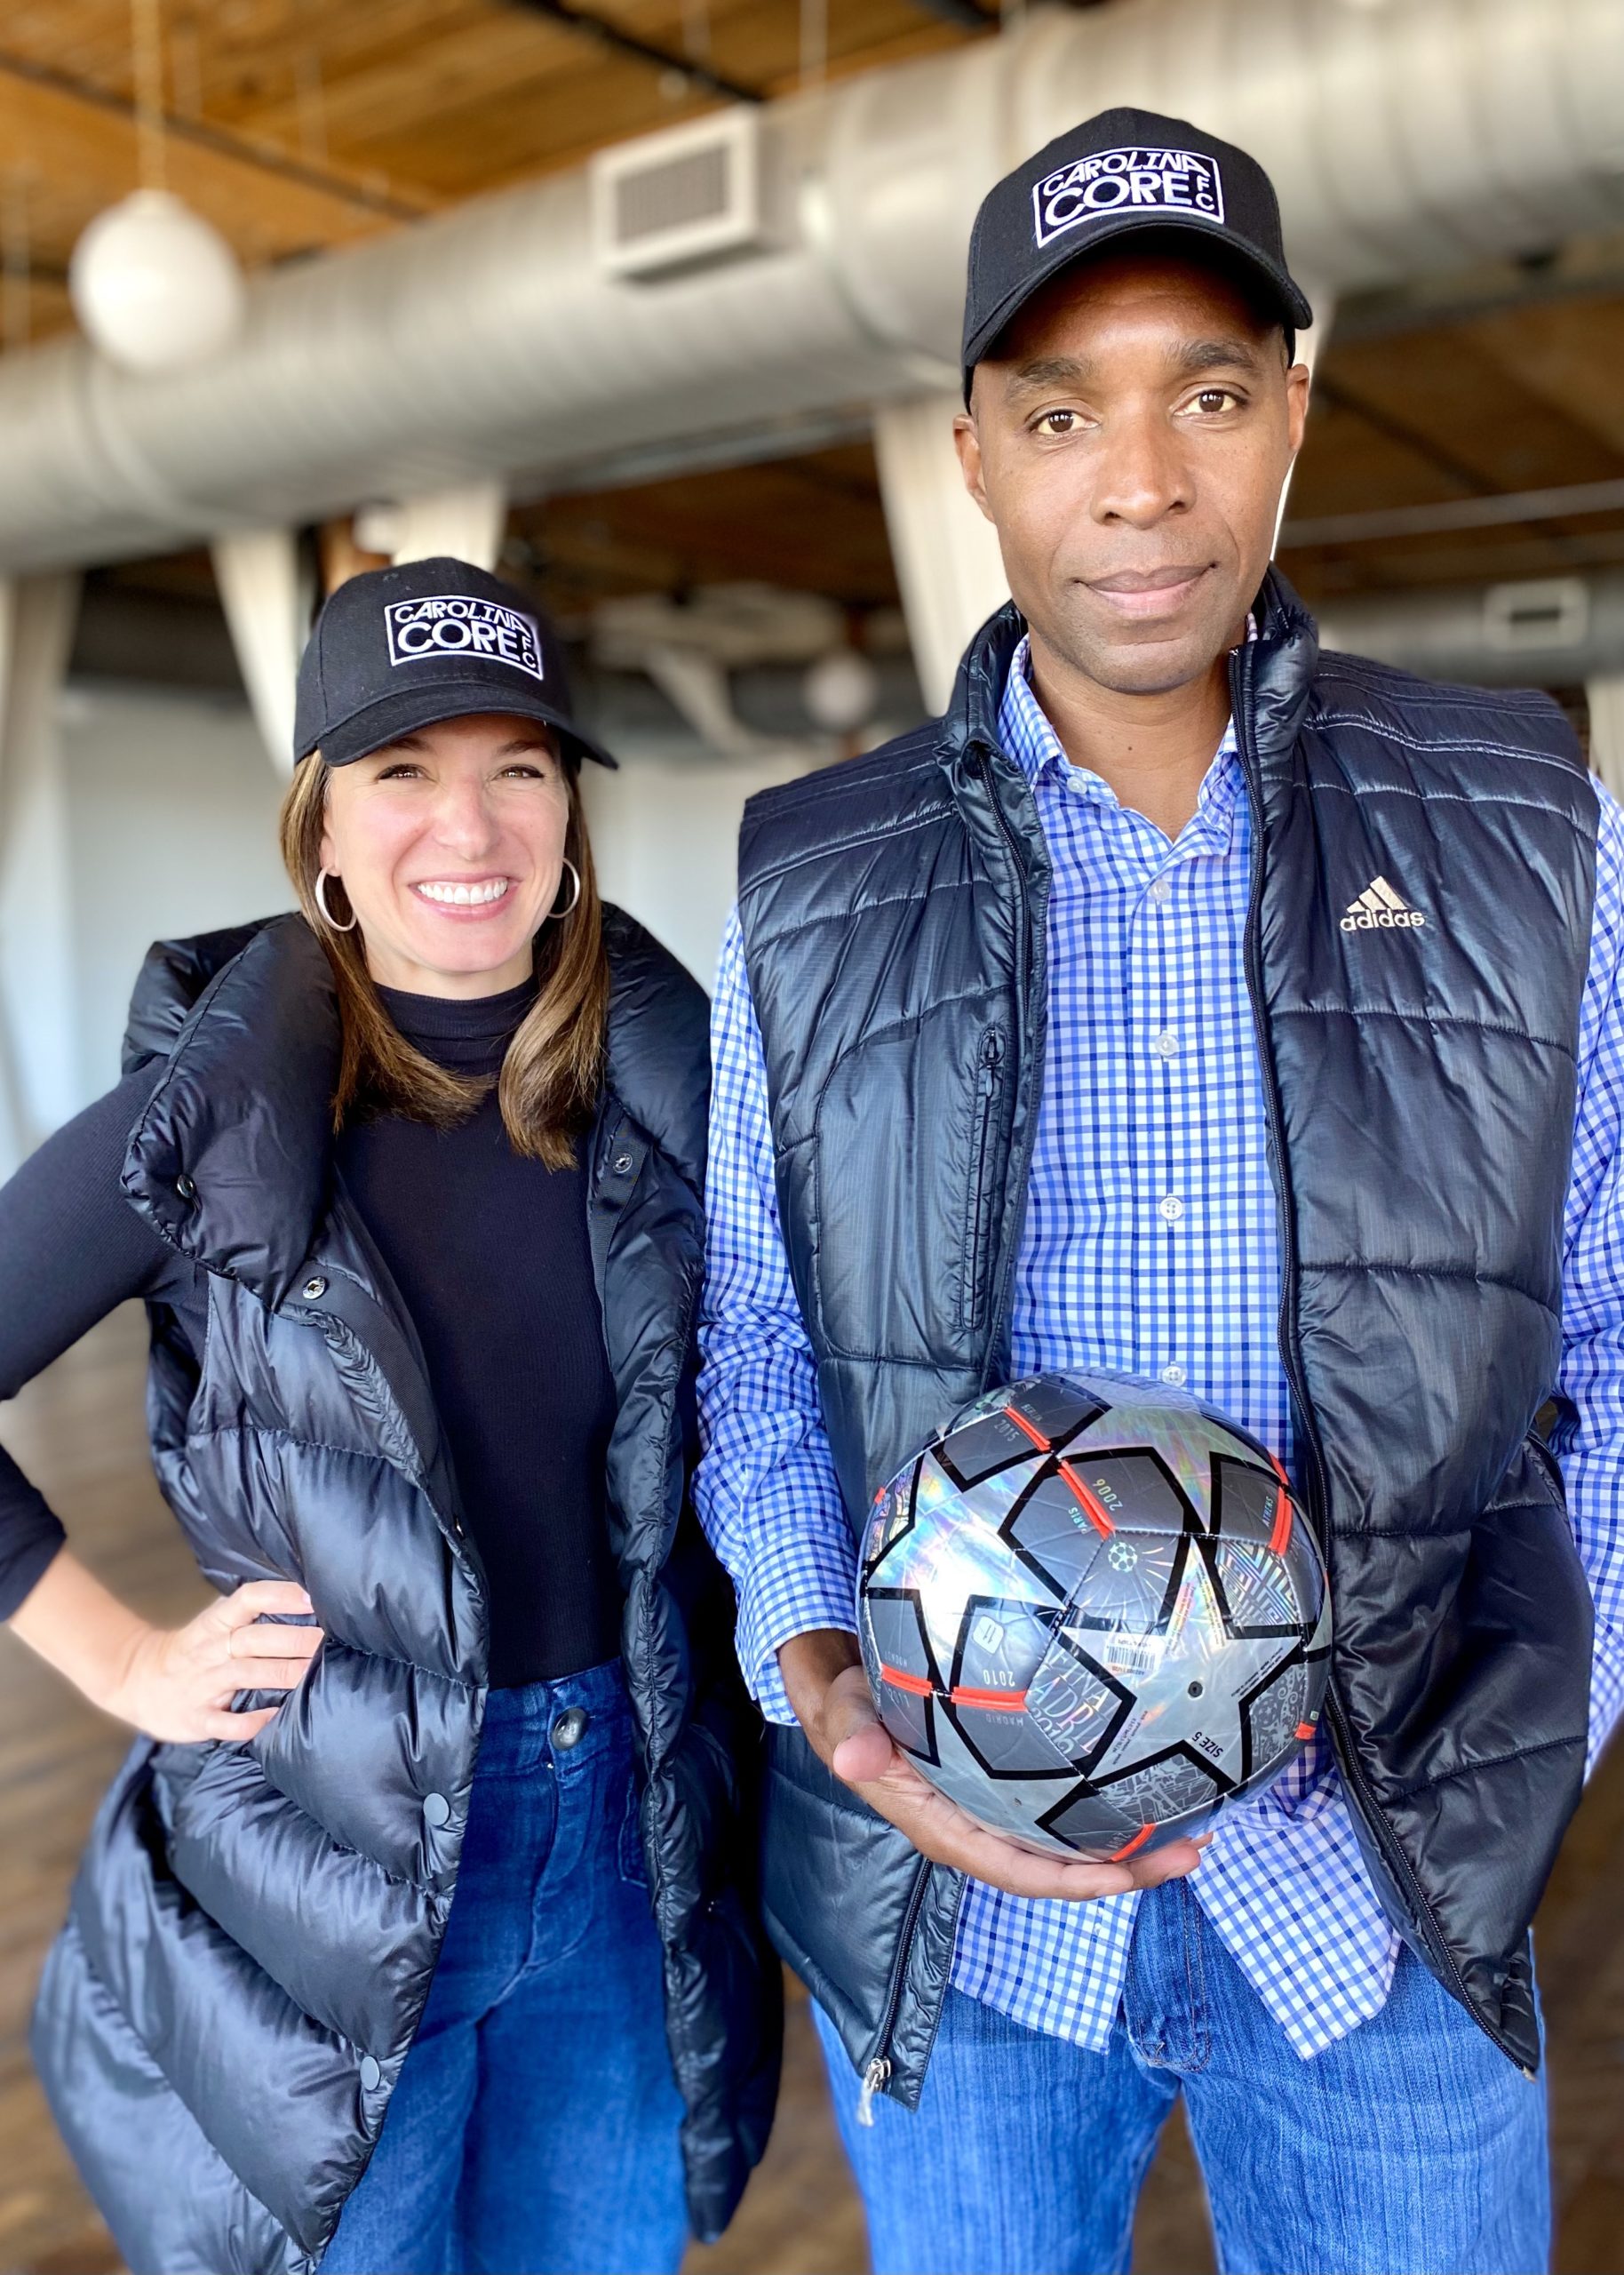 Megan Oglesby of Carolina Soccer Ventures, LLC and Eddie Pope, Chief Sporting Officer 